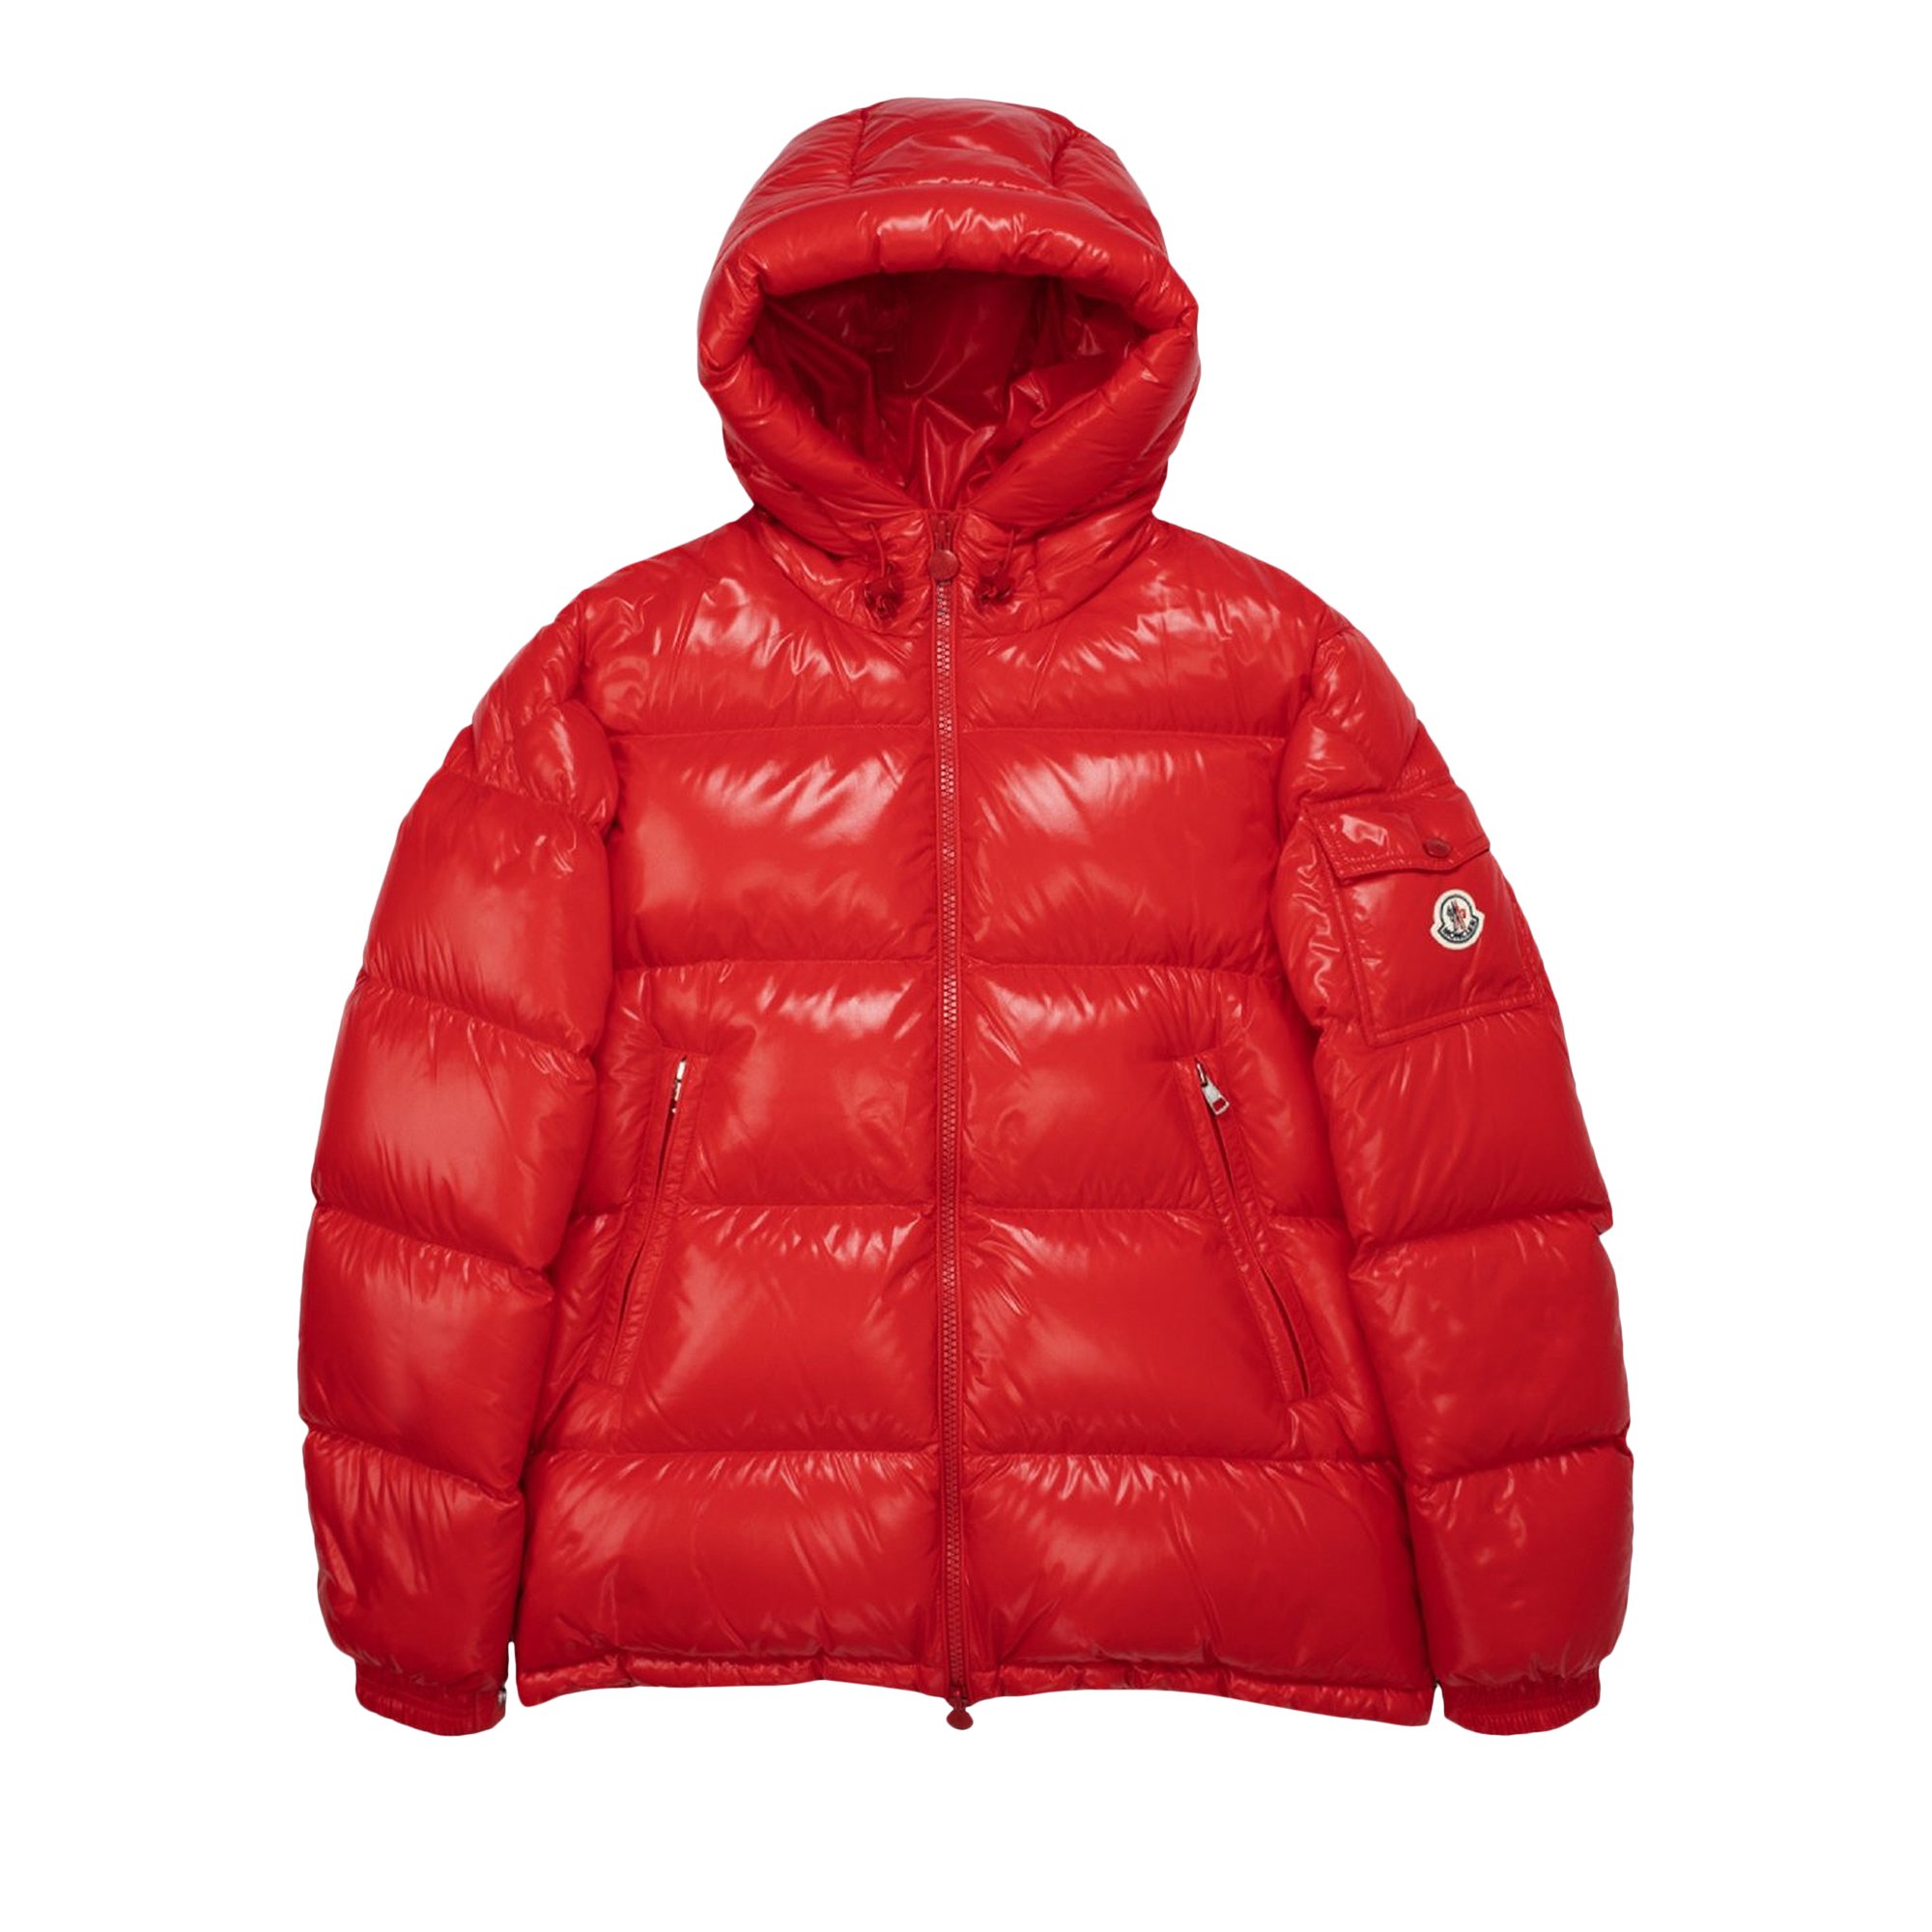 Buy Moncler Ecrins Shiny Puffer Jacket 'Red' - 1A001 68 68950 455 